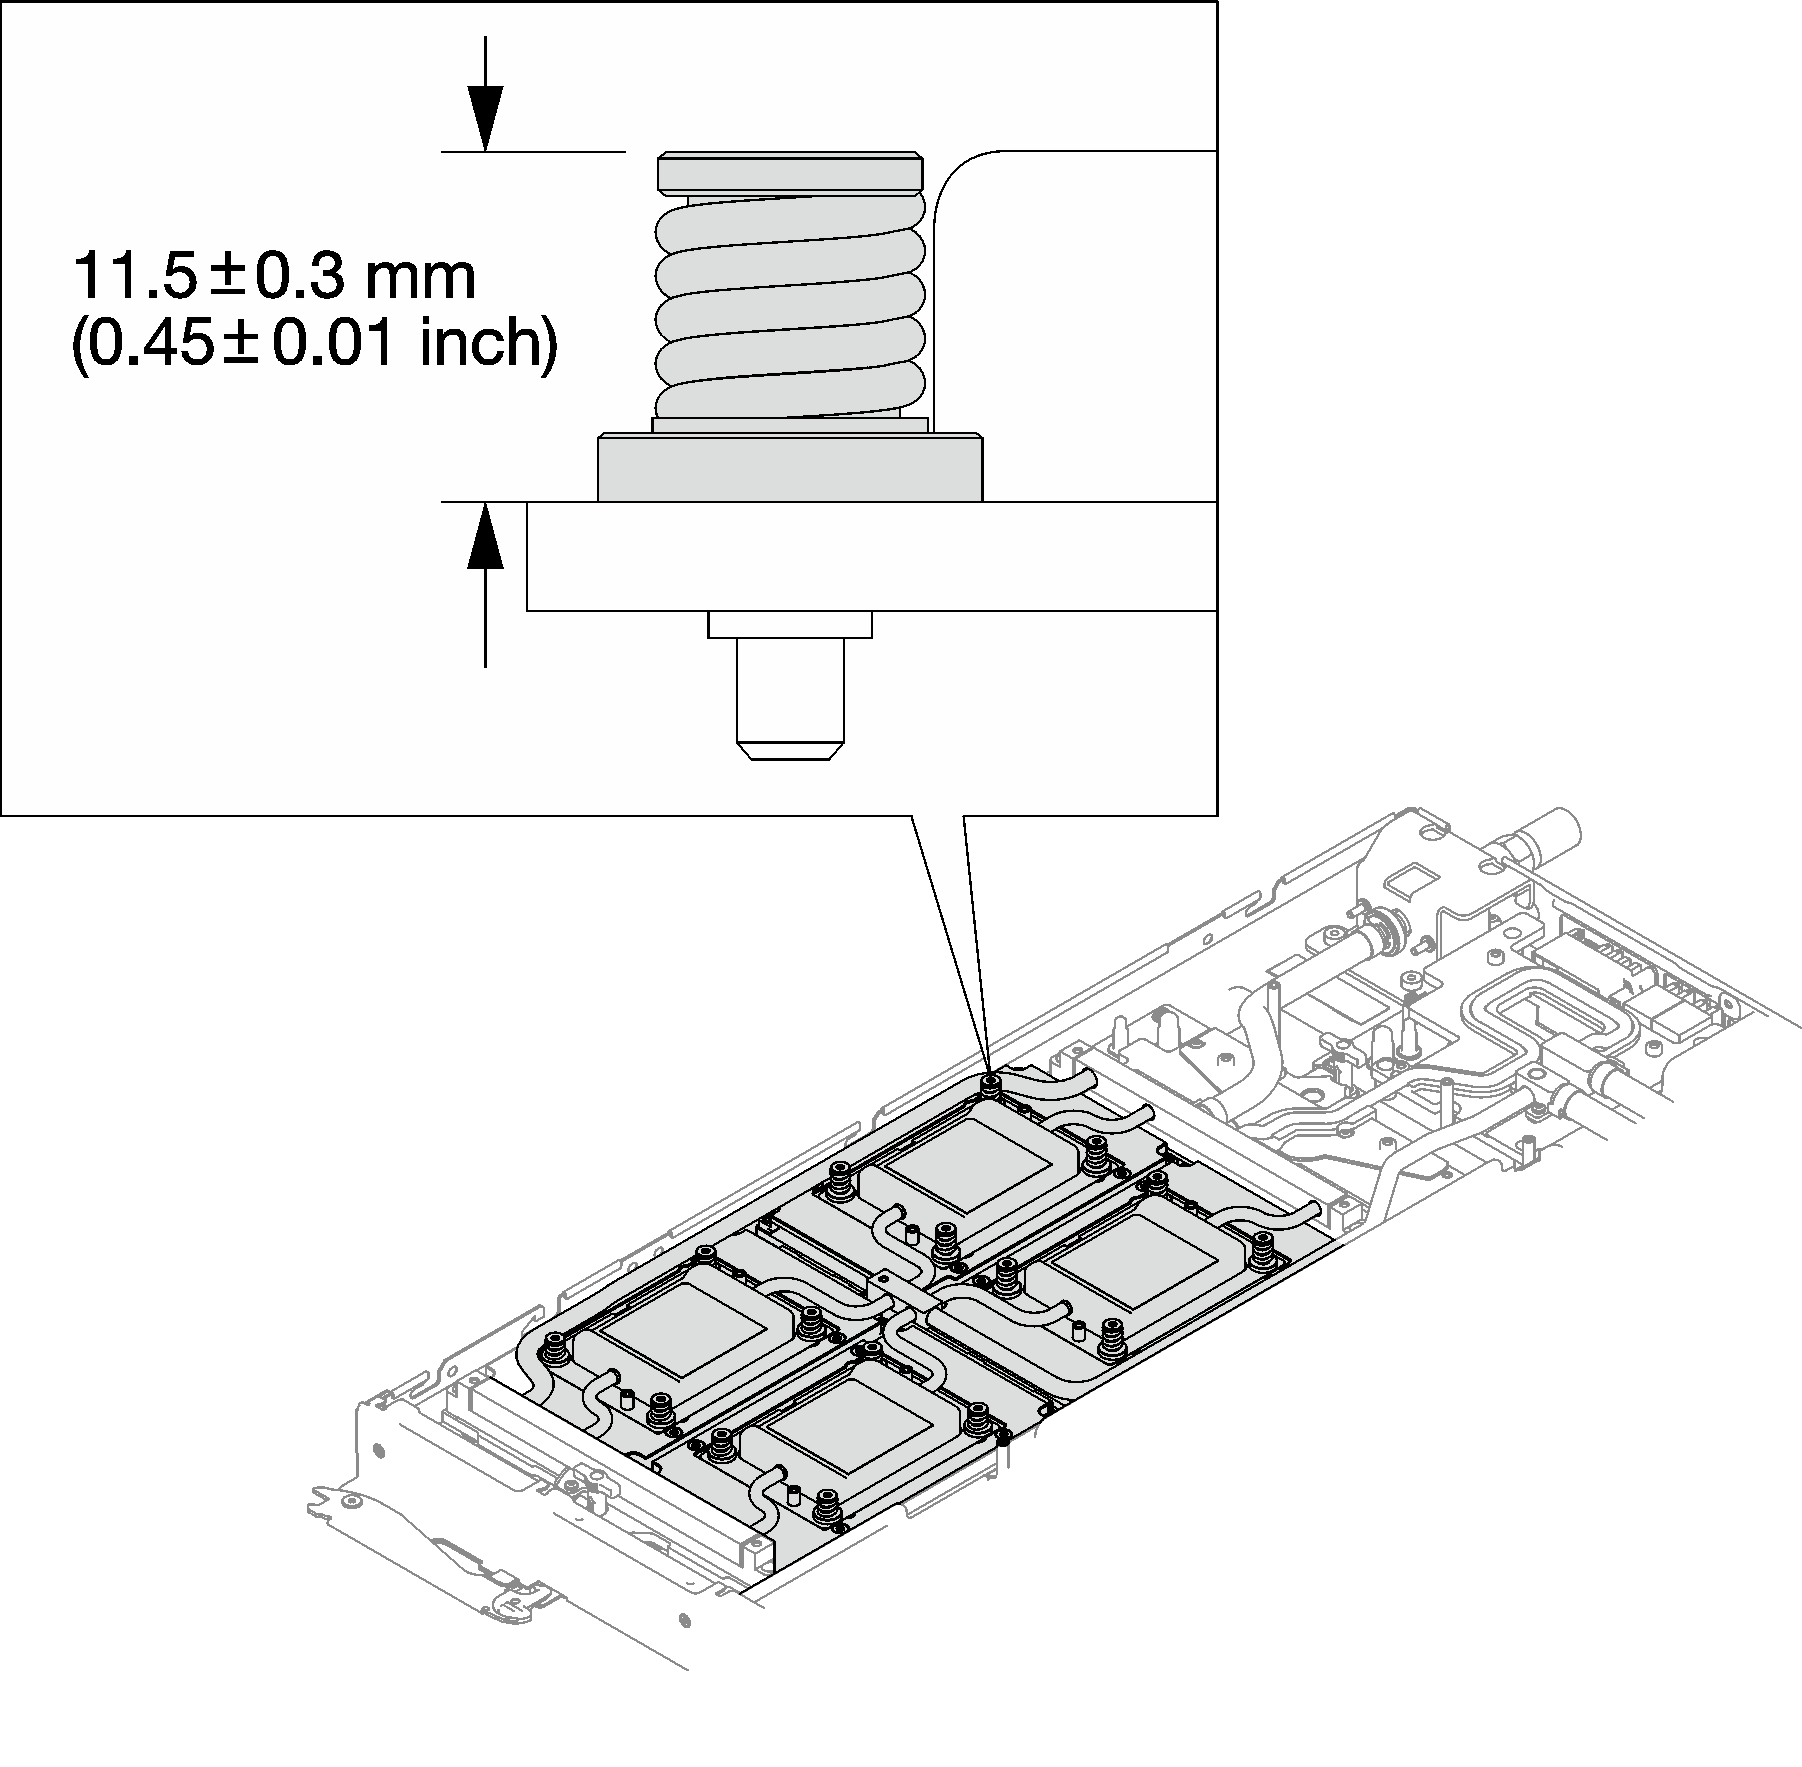 Height of properly installed GPU OAM cold plate screw